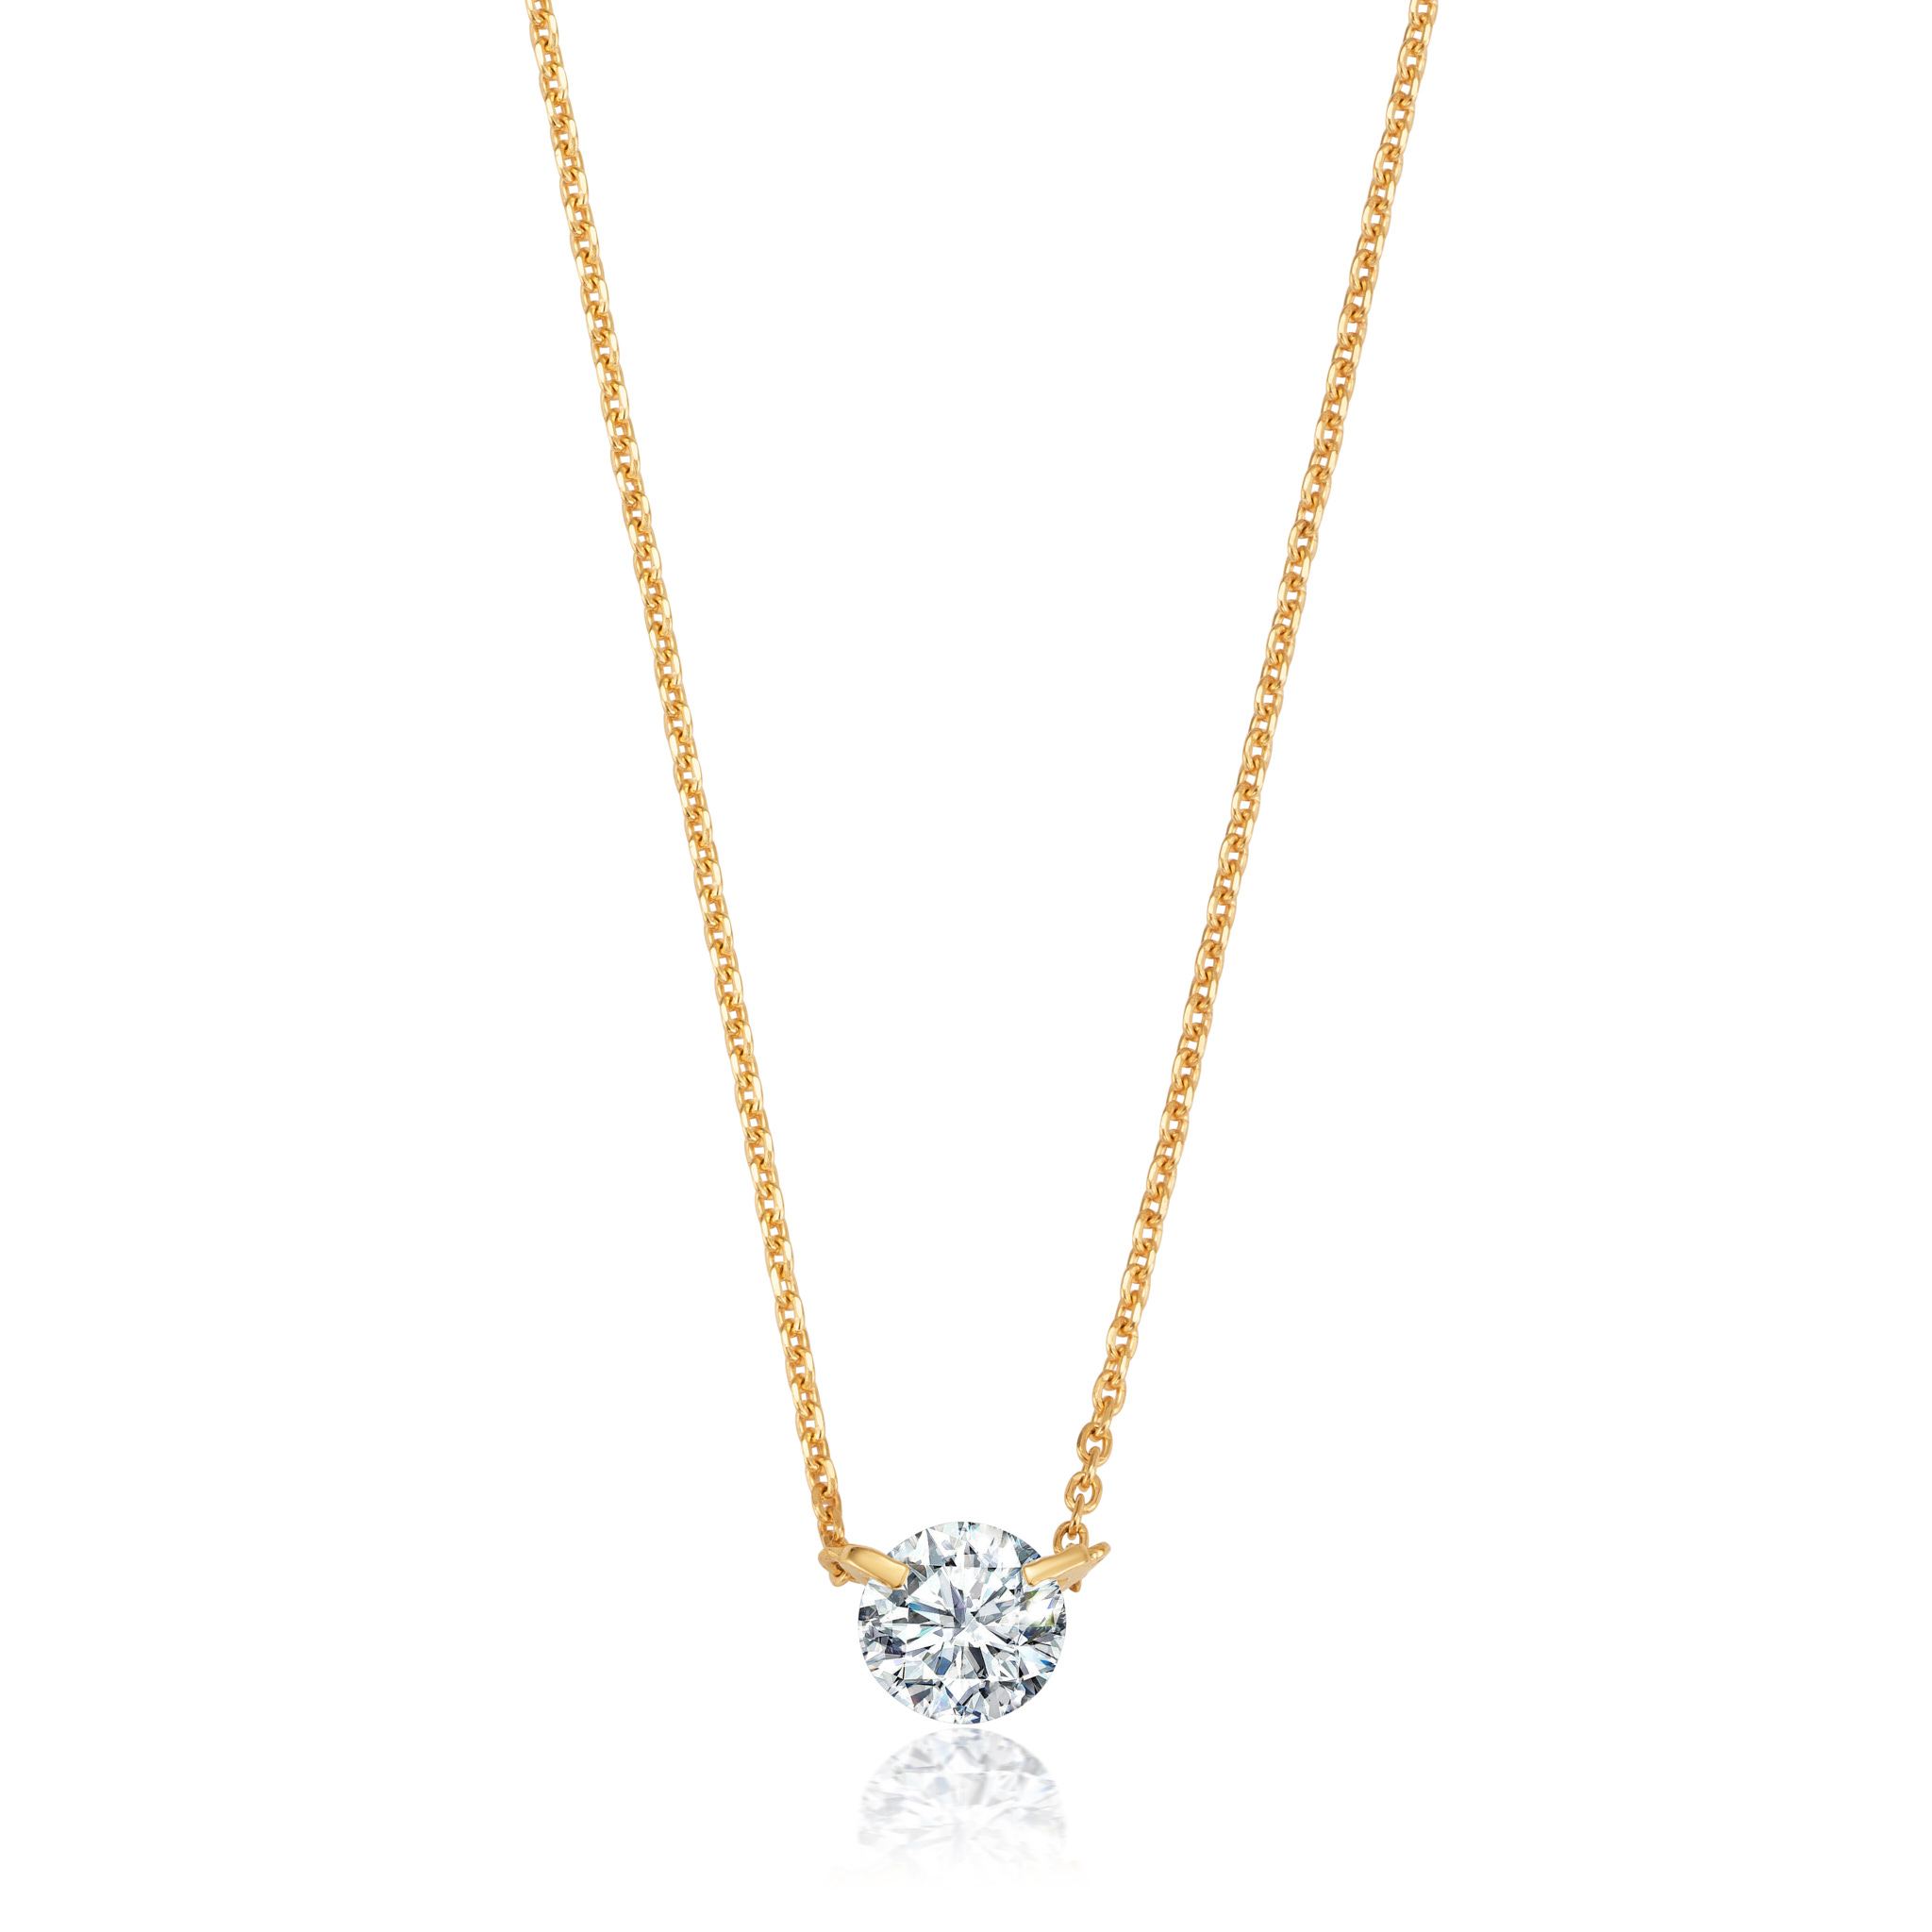 Graziela Gems - Necklace - 1/2ct Single Floating Diamond Necklace - Yellow Gold